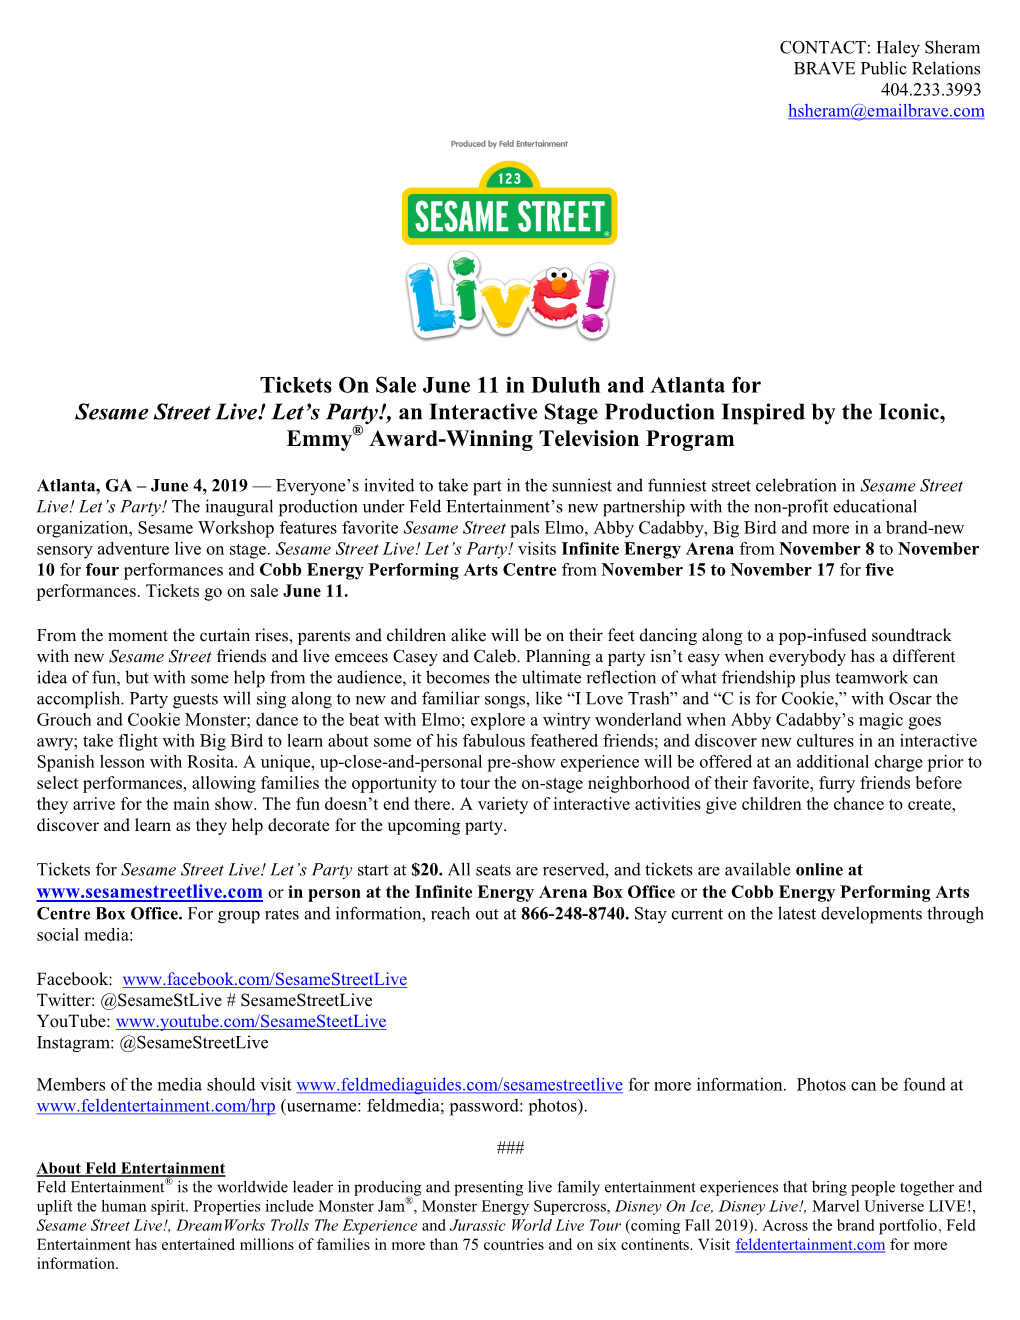 Tickets on Sale June 11 in Duluth and Atlanta for Sesame Street Live